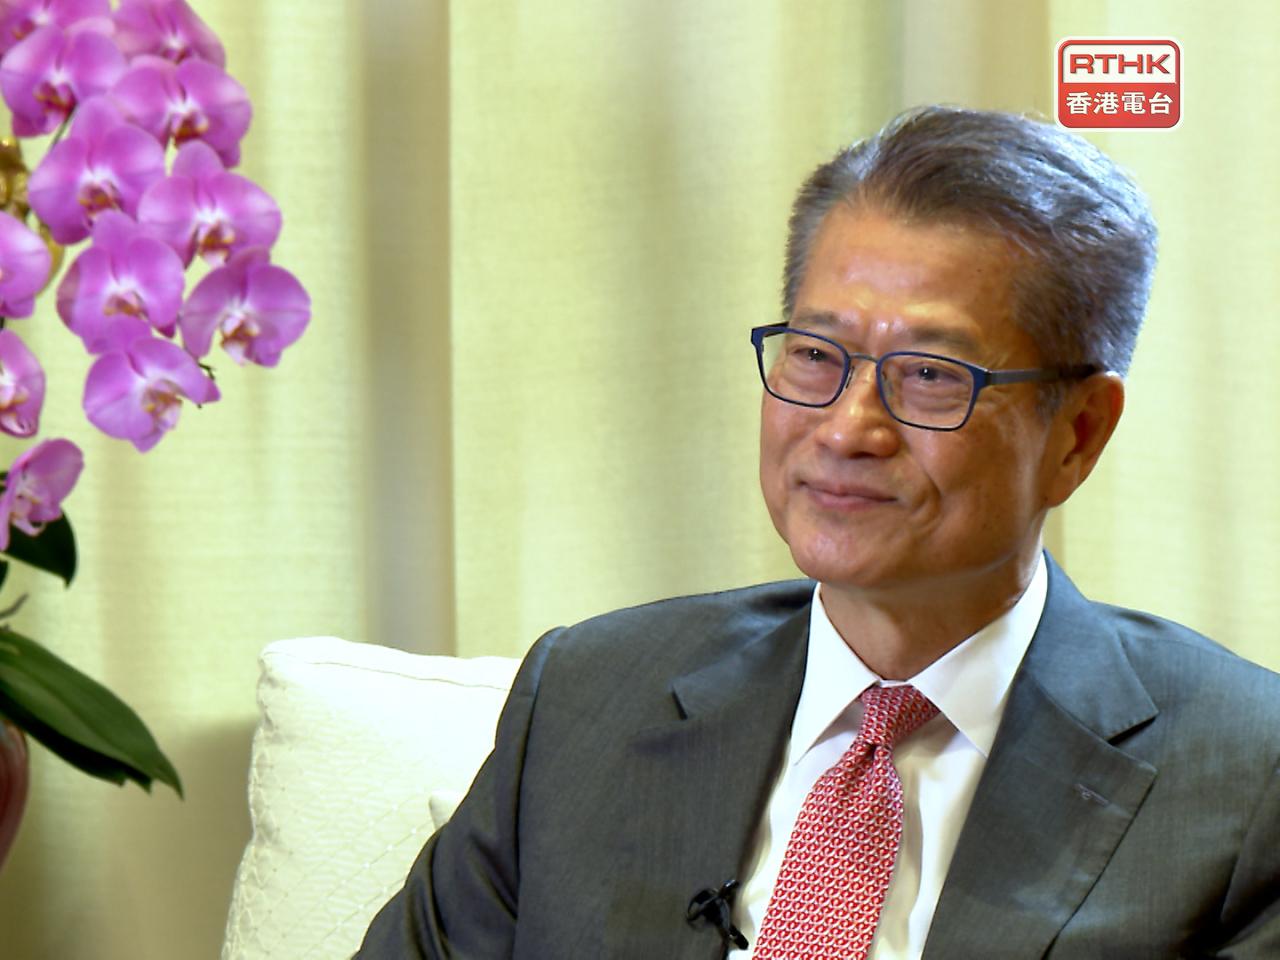 Local economy continues to grow: Paul Chan